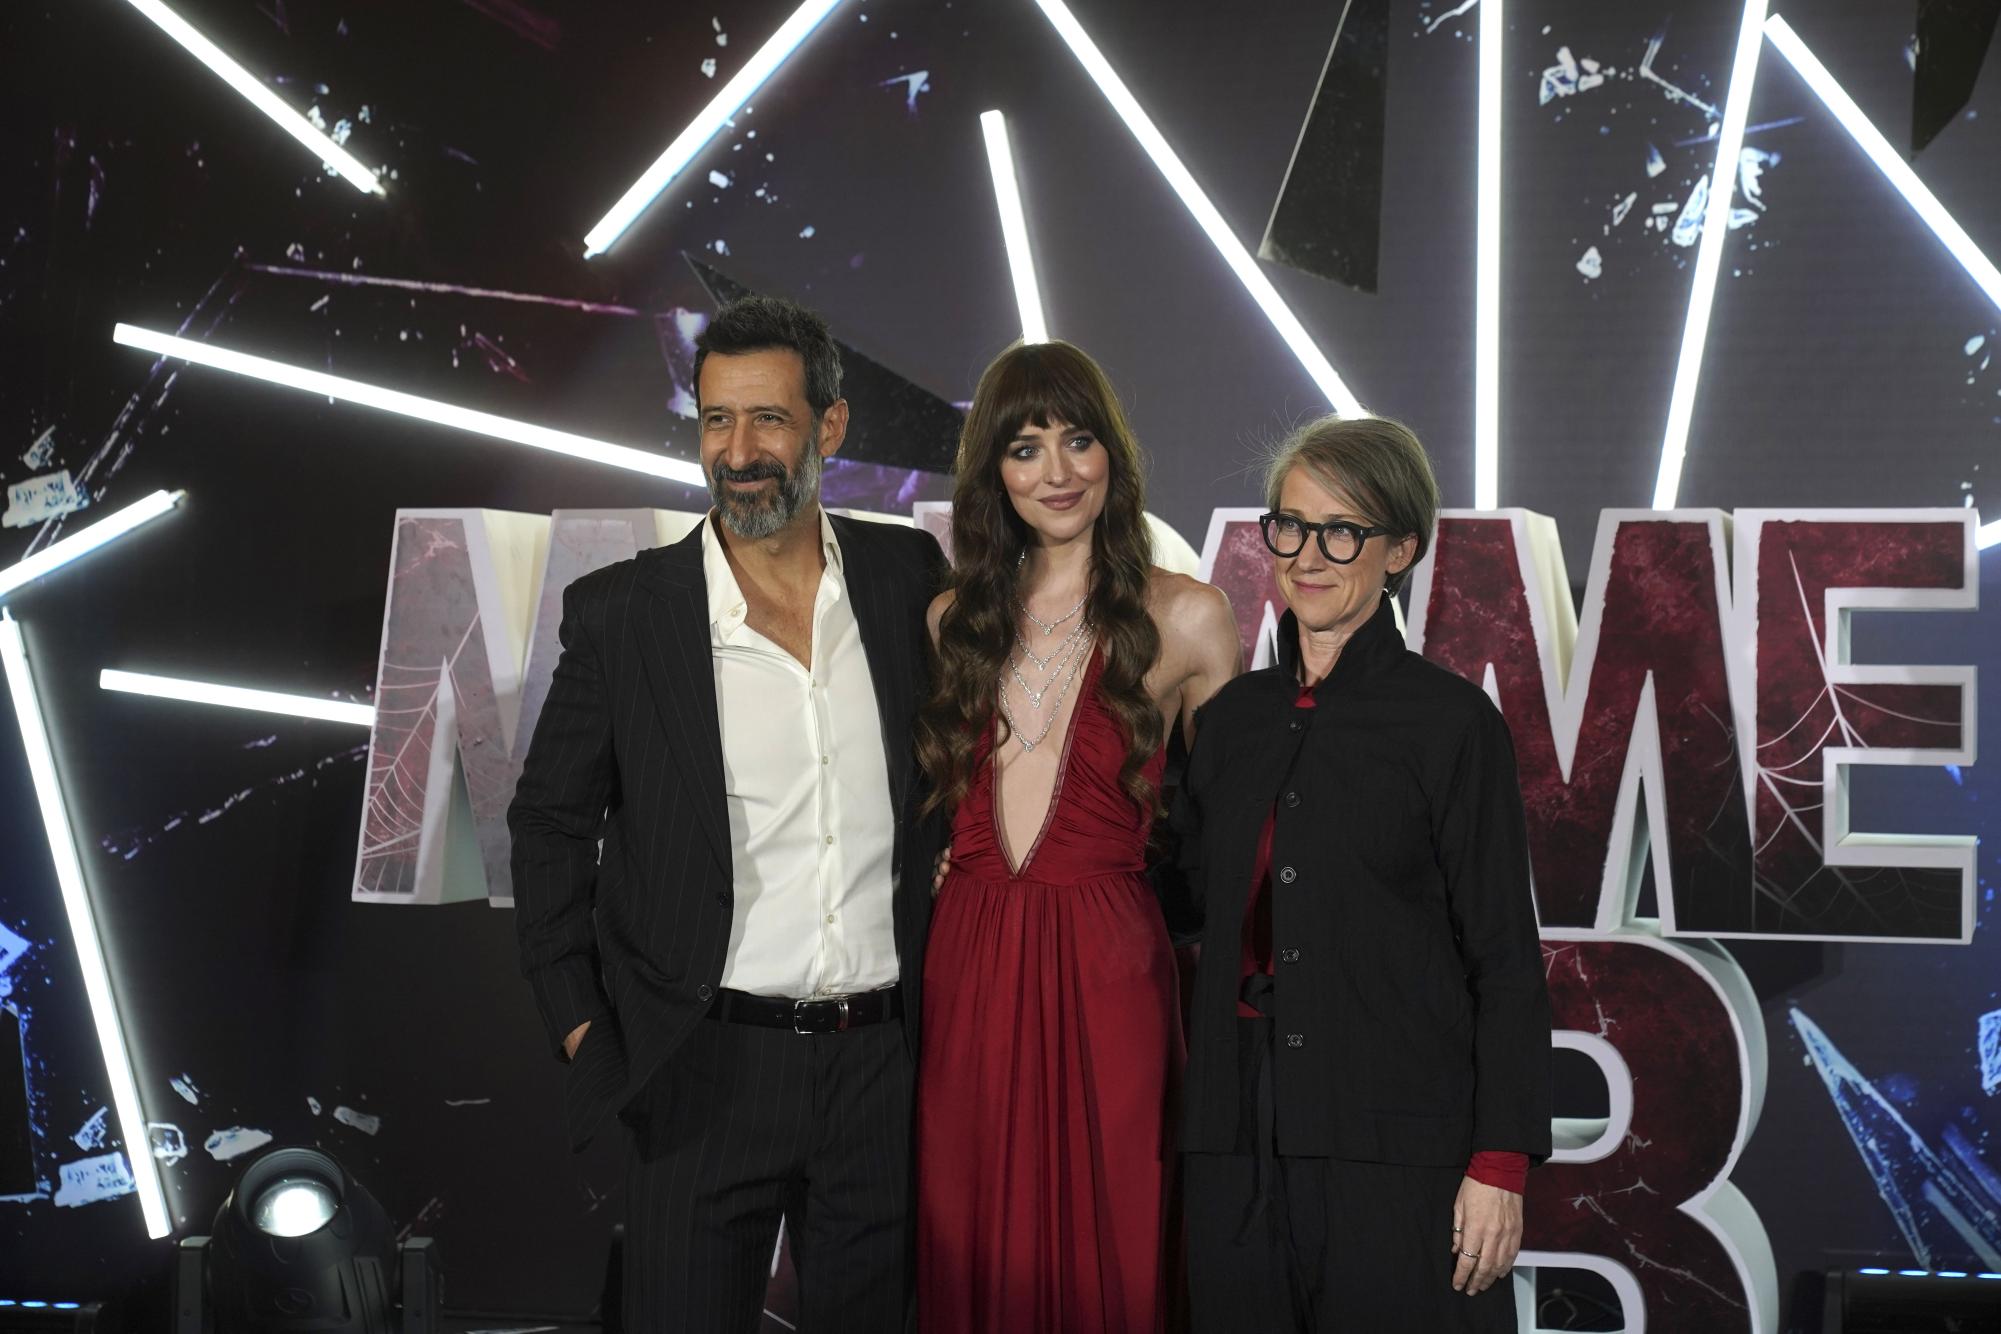 Actors José María Yazpik (from left), Dakota Johnson and filmmaker S. J. Clarkson pose on the red carpet premiere of Madame Web in Mexico City. Madame Web is the most recent Marvel movie to come out. (Marco Ugarte | AP Photo) 